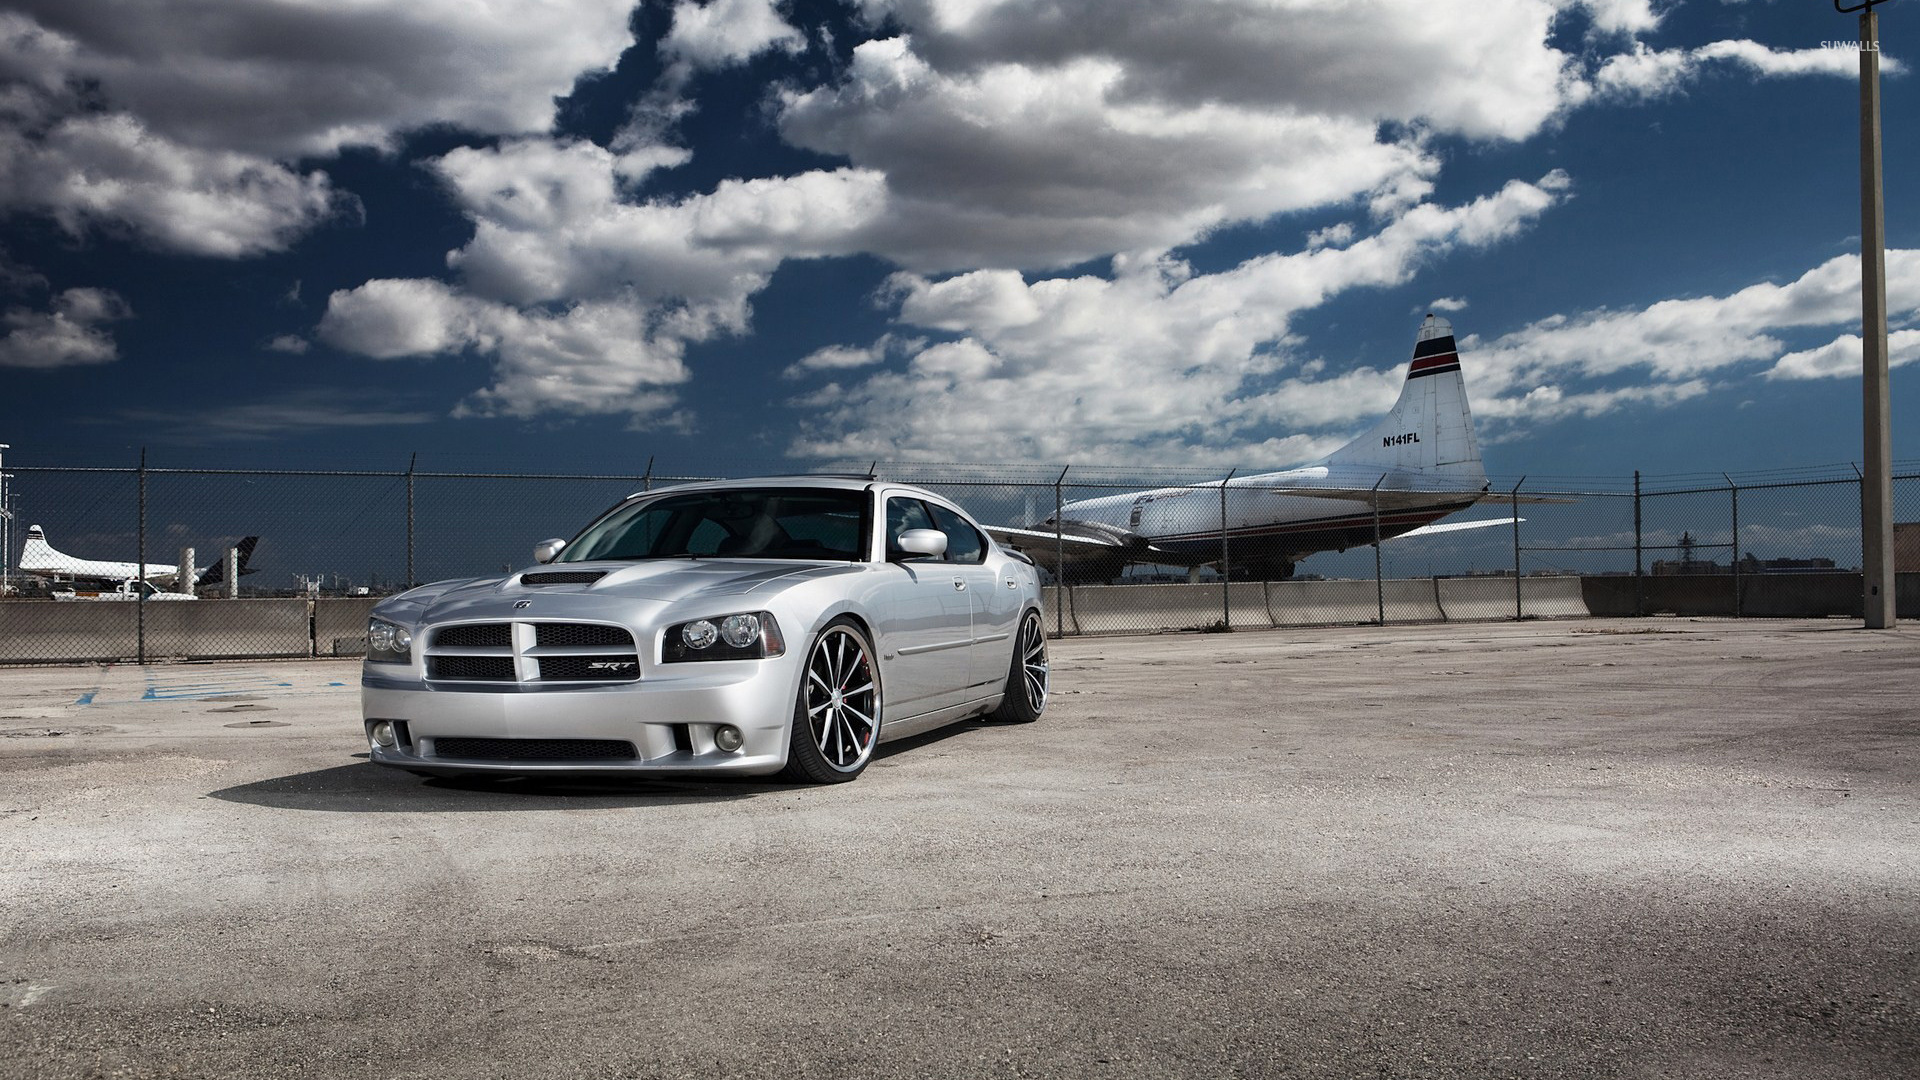 2011 Dodge Charger wallpaper - 520920